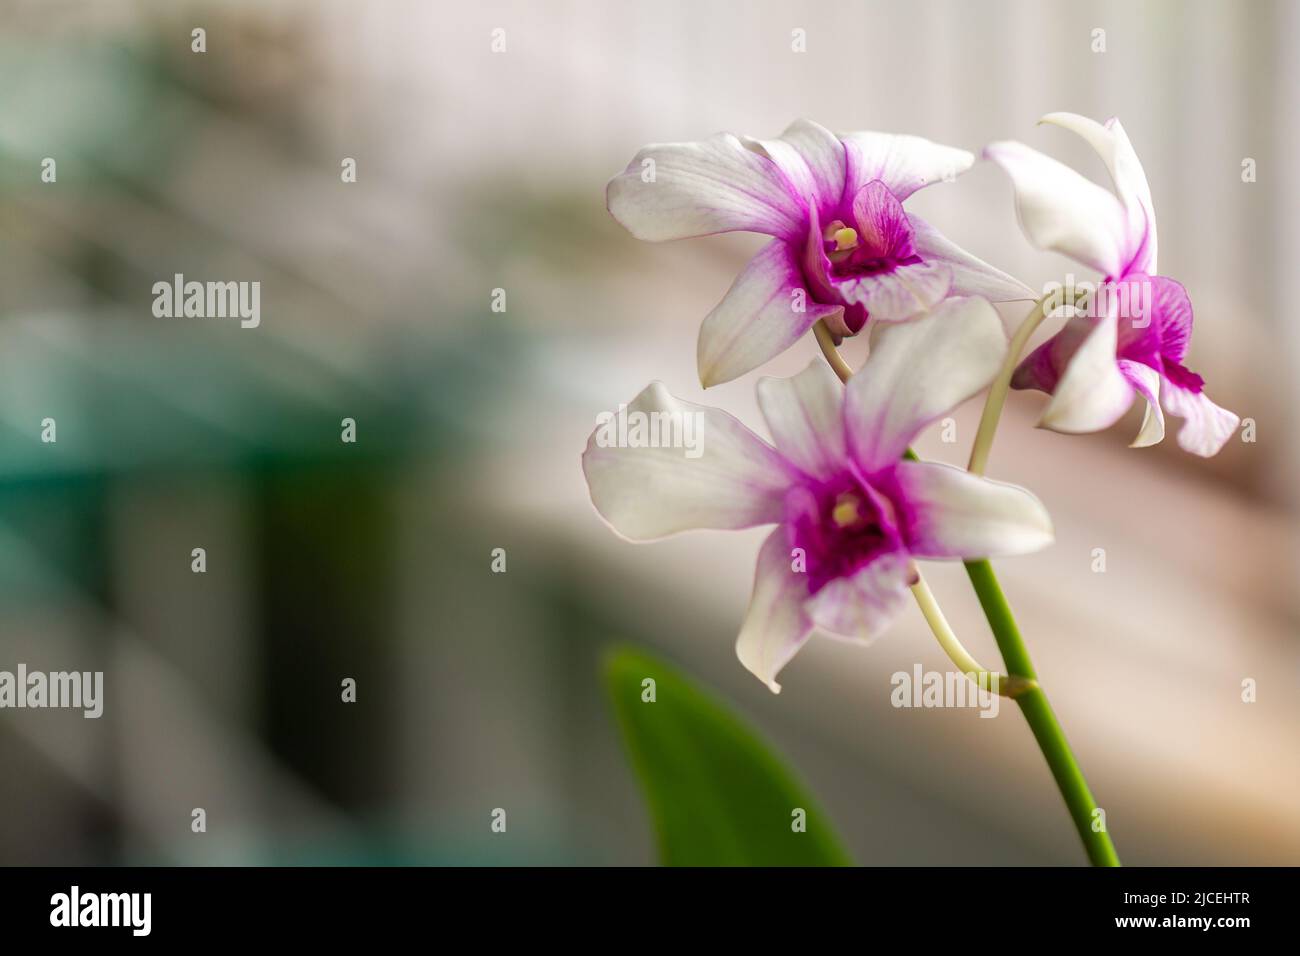 A purple and white dendrobium orchid flower, green stem and leaves, blurred green foliage background Stock Photo